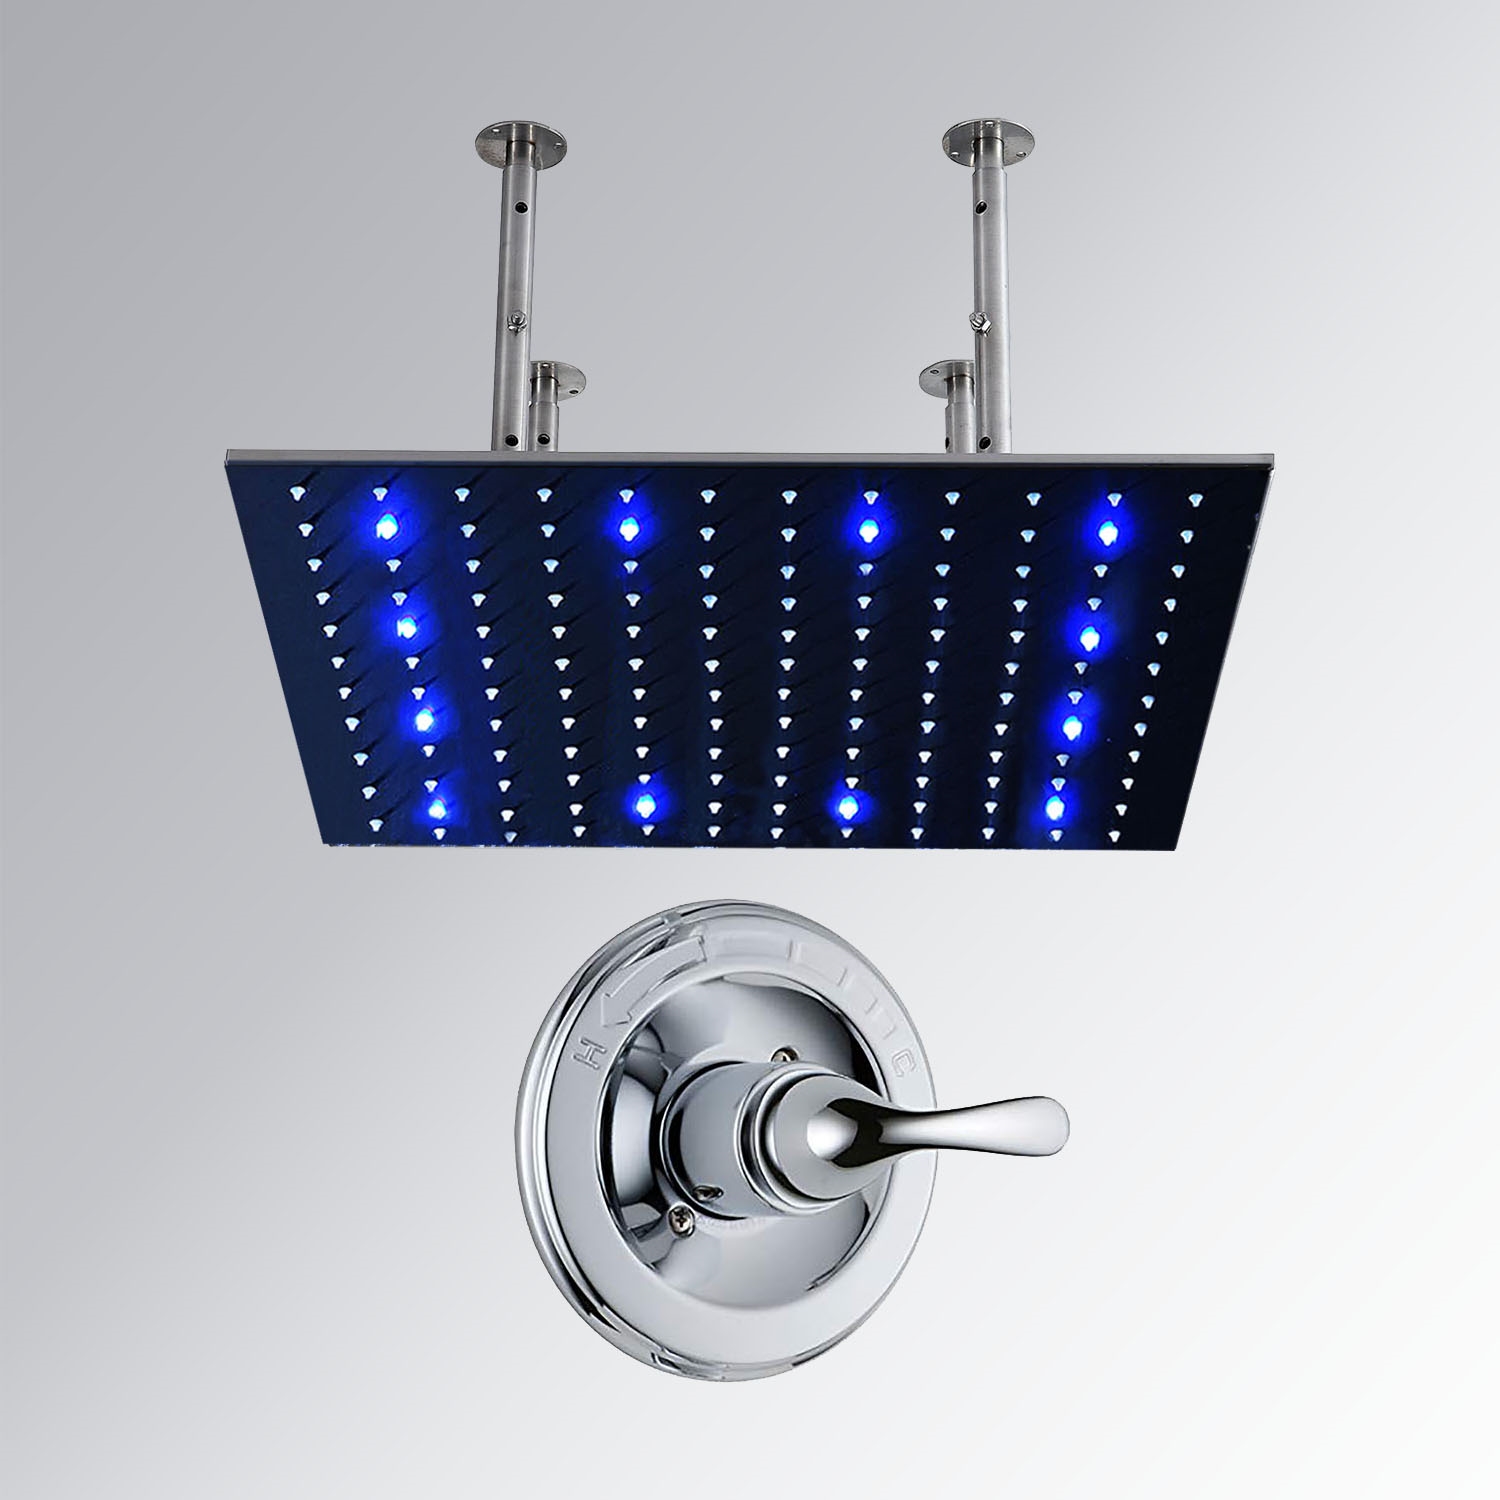 FONTANA COLOR CHANGING LED RAIN SHOWER HEAD (SOLID BRASS) WITH BUILT IN MIXER